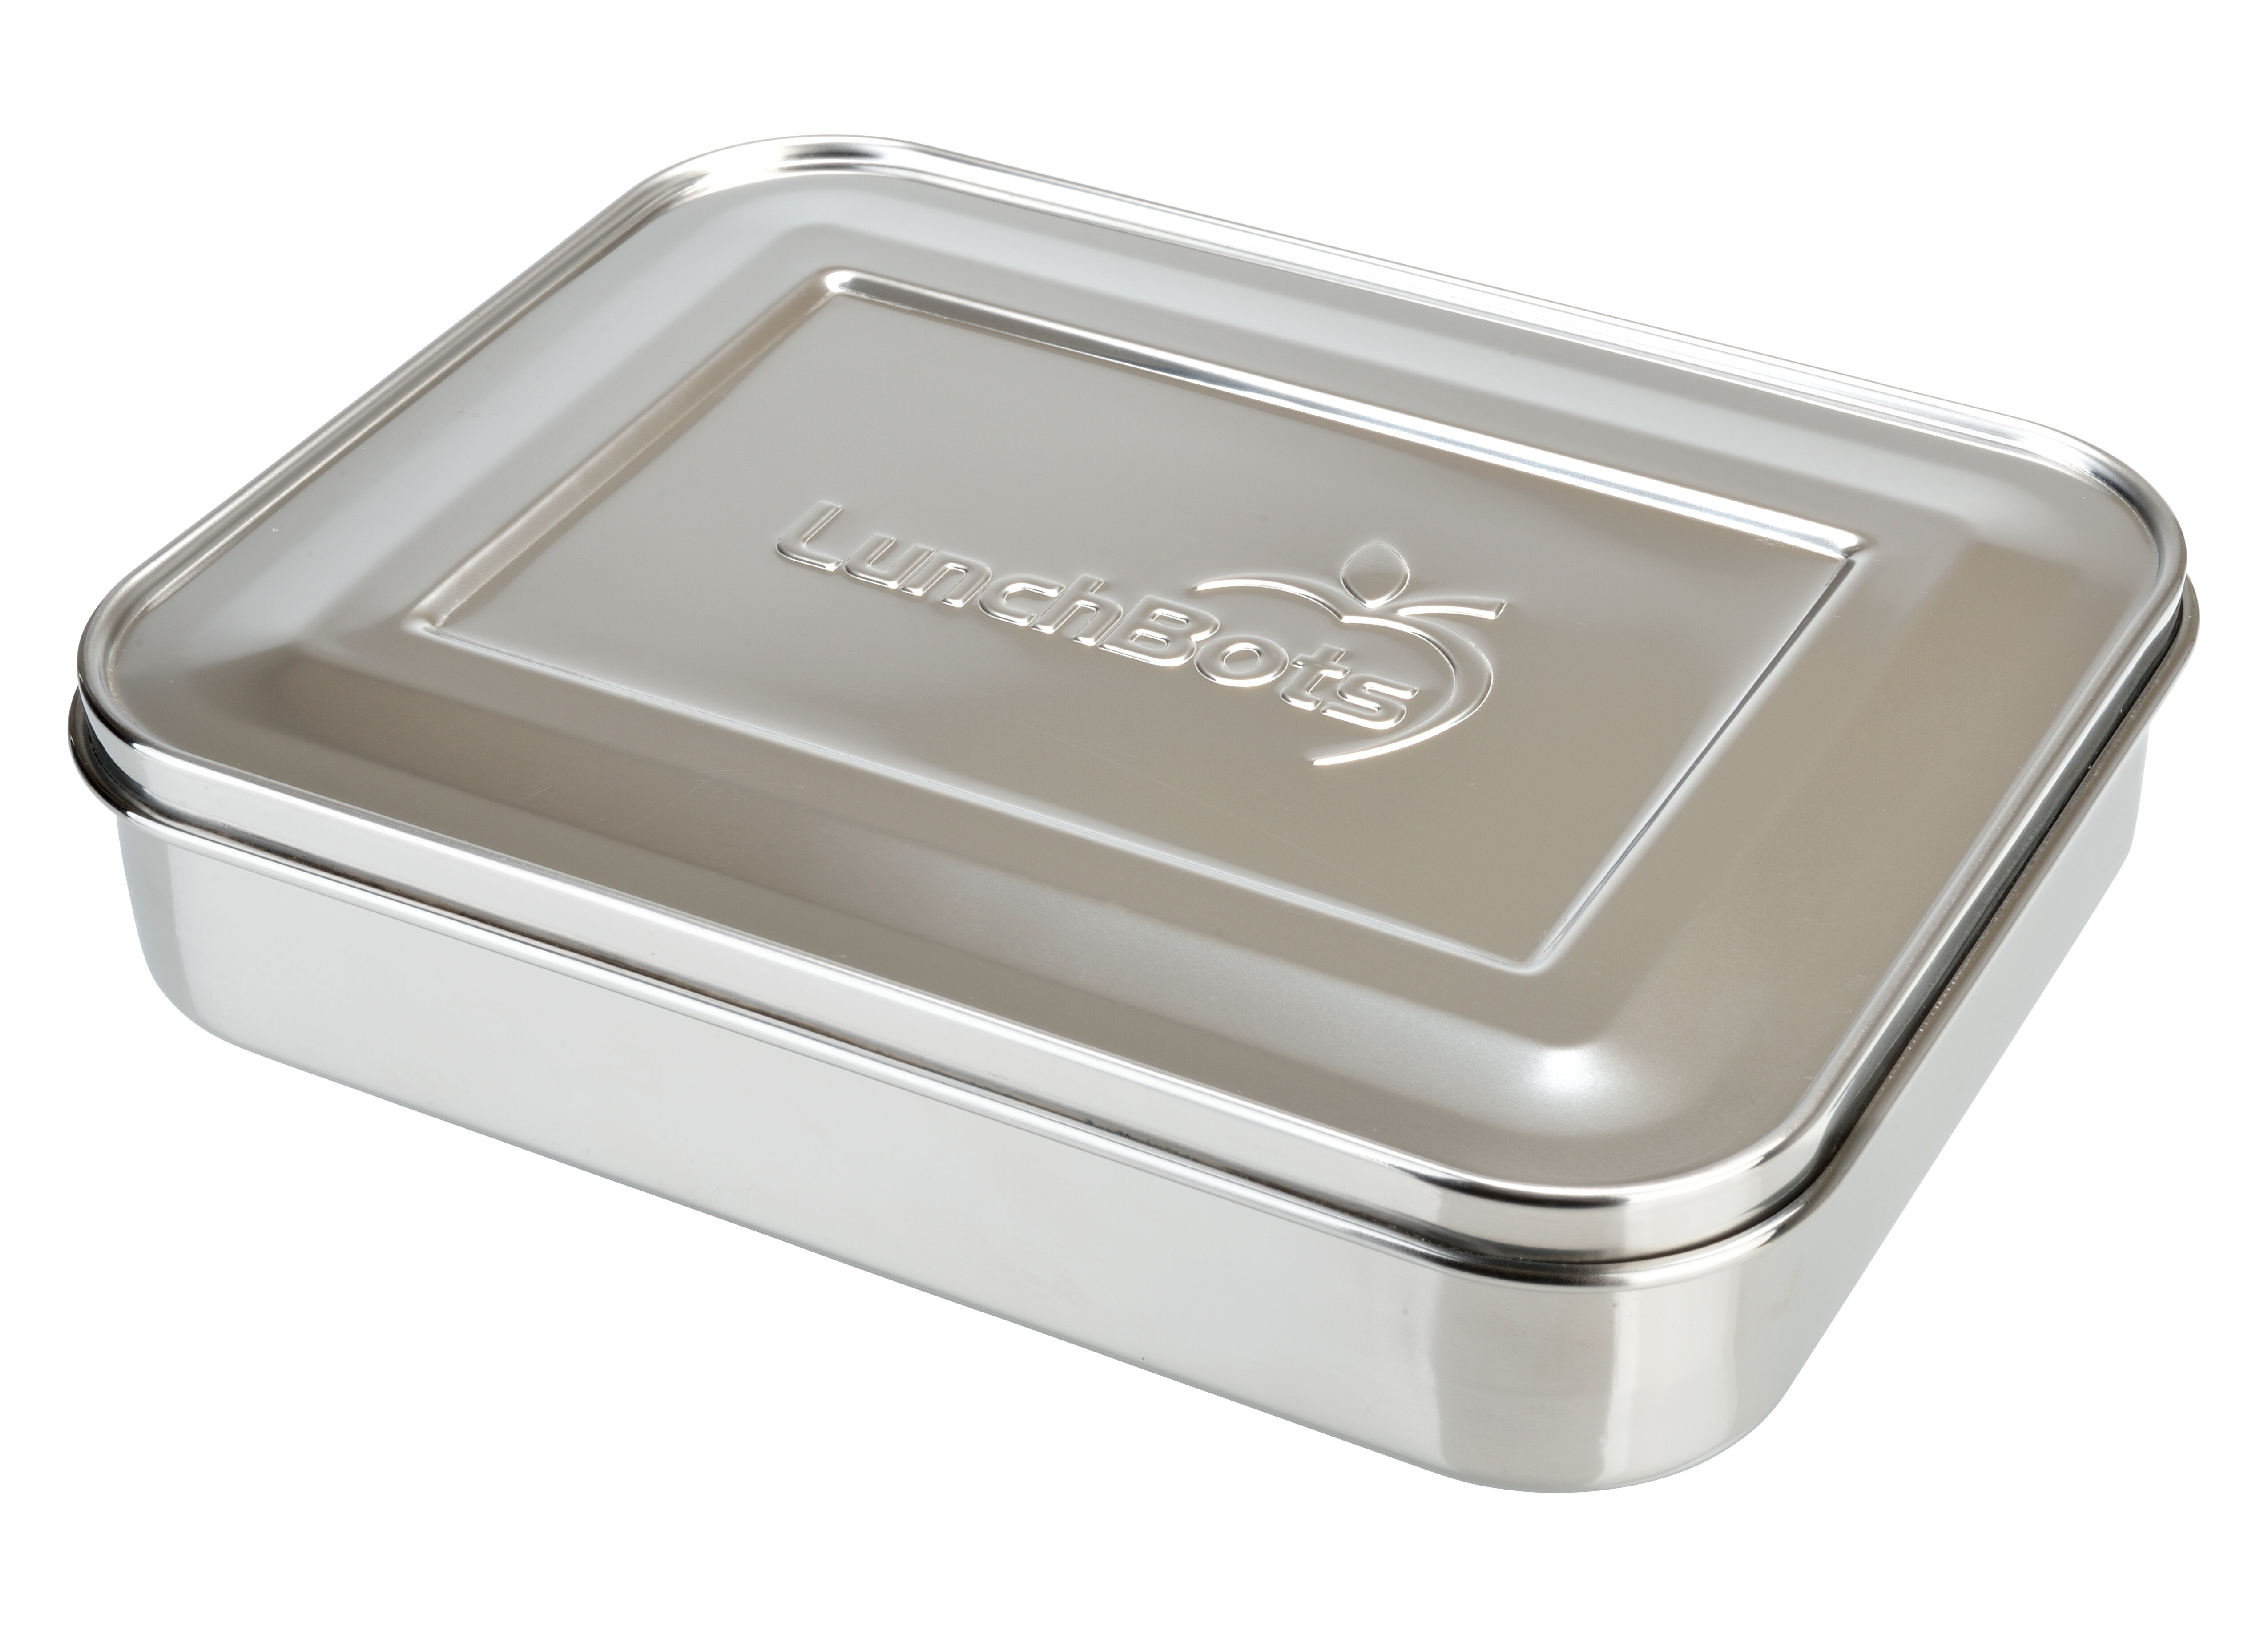 STAINLESS STEEL LUNCH BOX LARGE